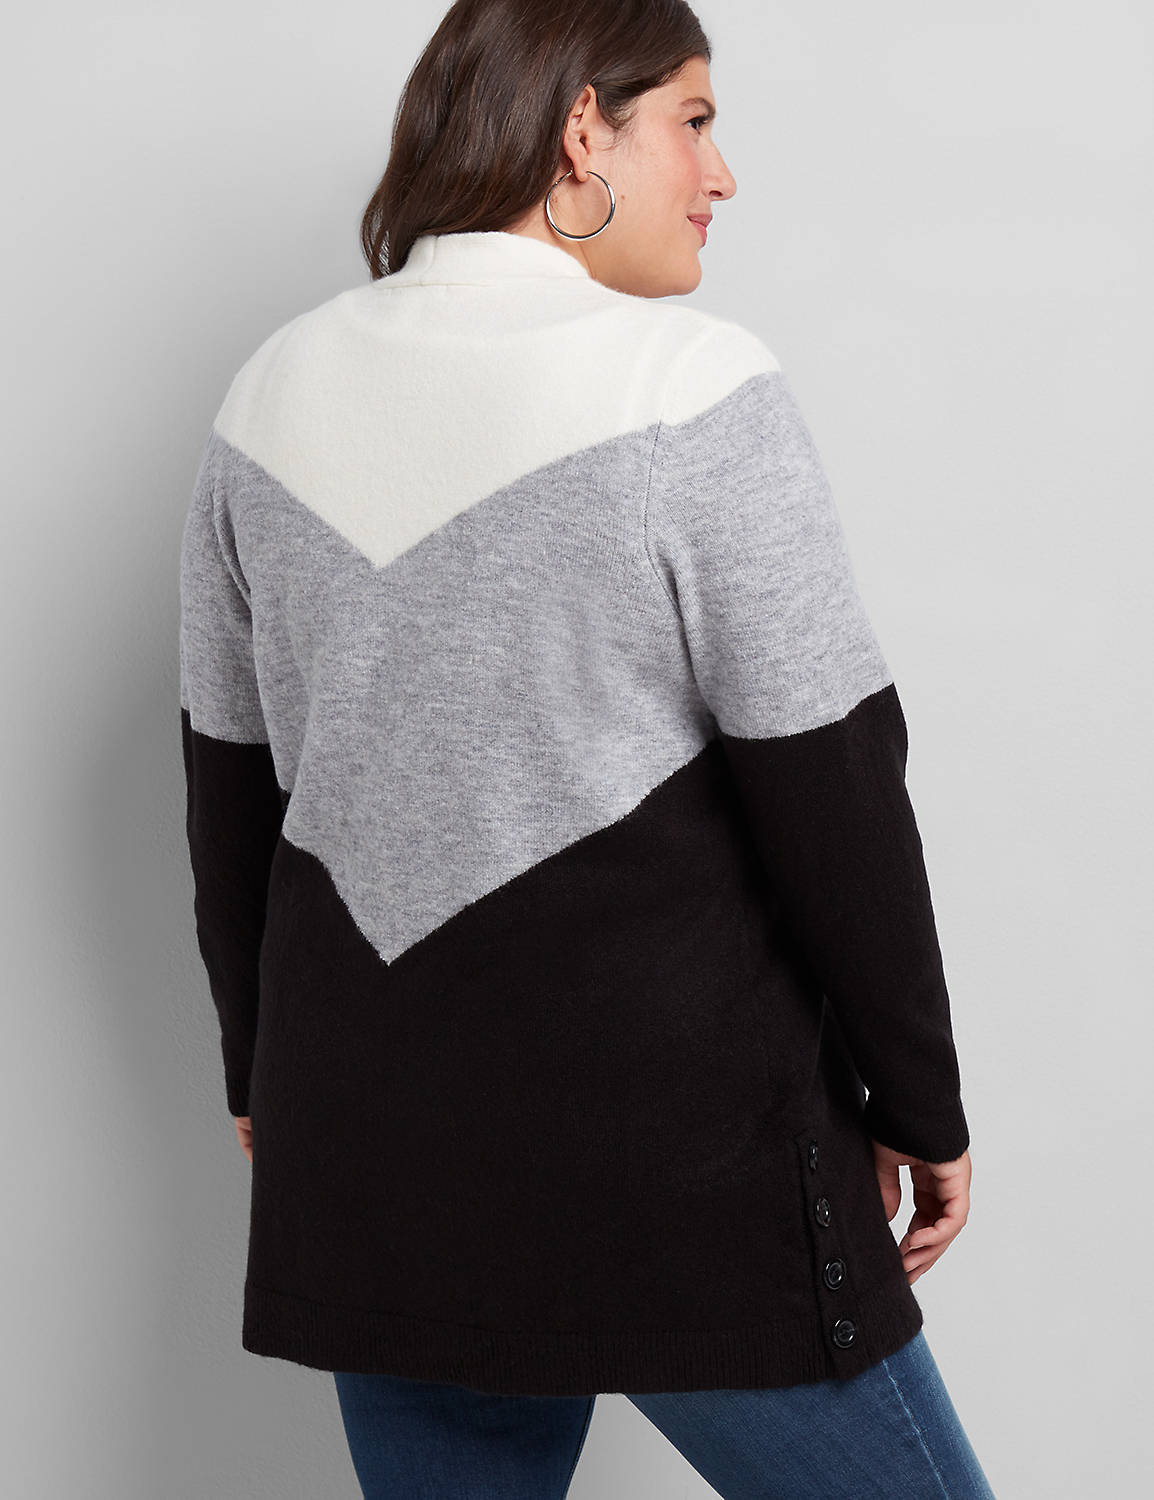 Long Sleeve Open Front Side Button Vent Cardigan :Gardenia/ Med Heather Grey/ Charcoal Heather Stripe:10/12 Product Image 2